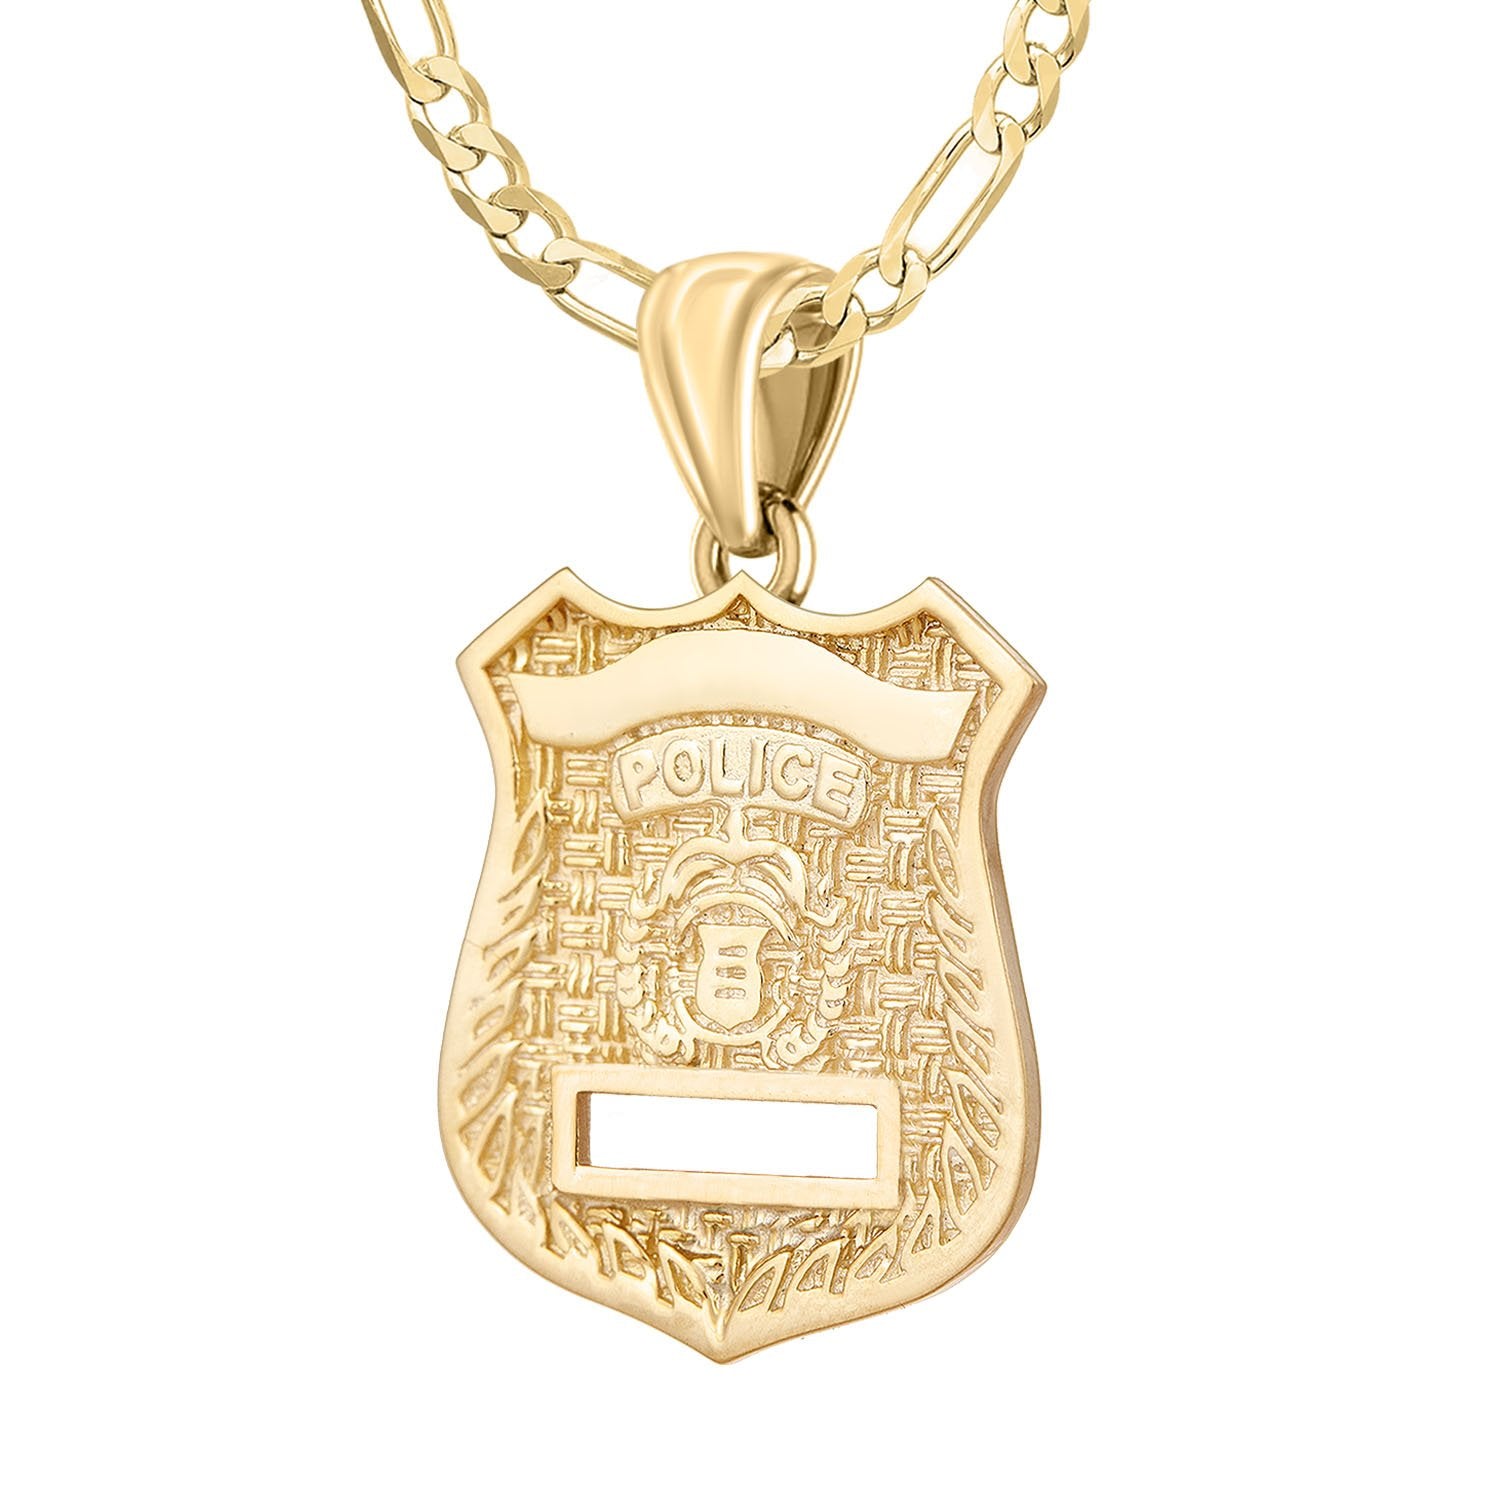 Police Badge Necklace In Gold of 26mm - 2.8mm Figaro Chain